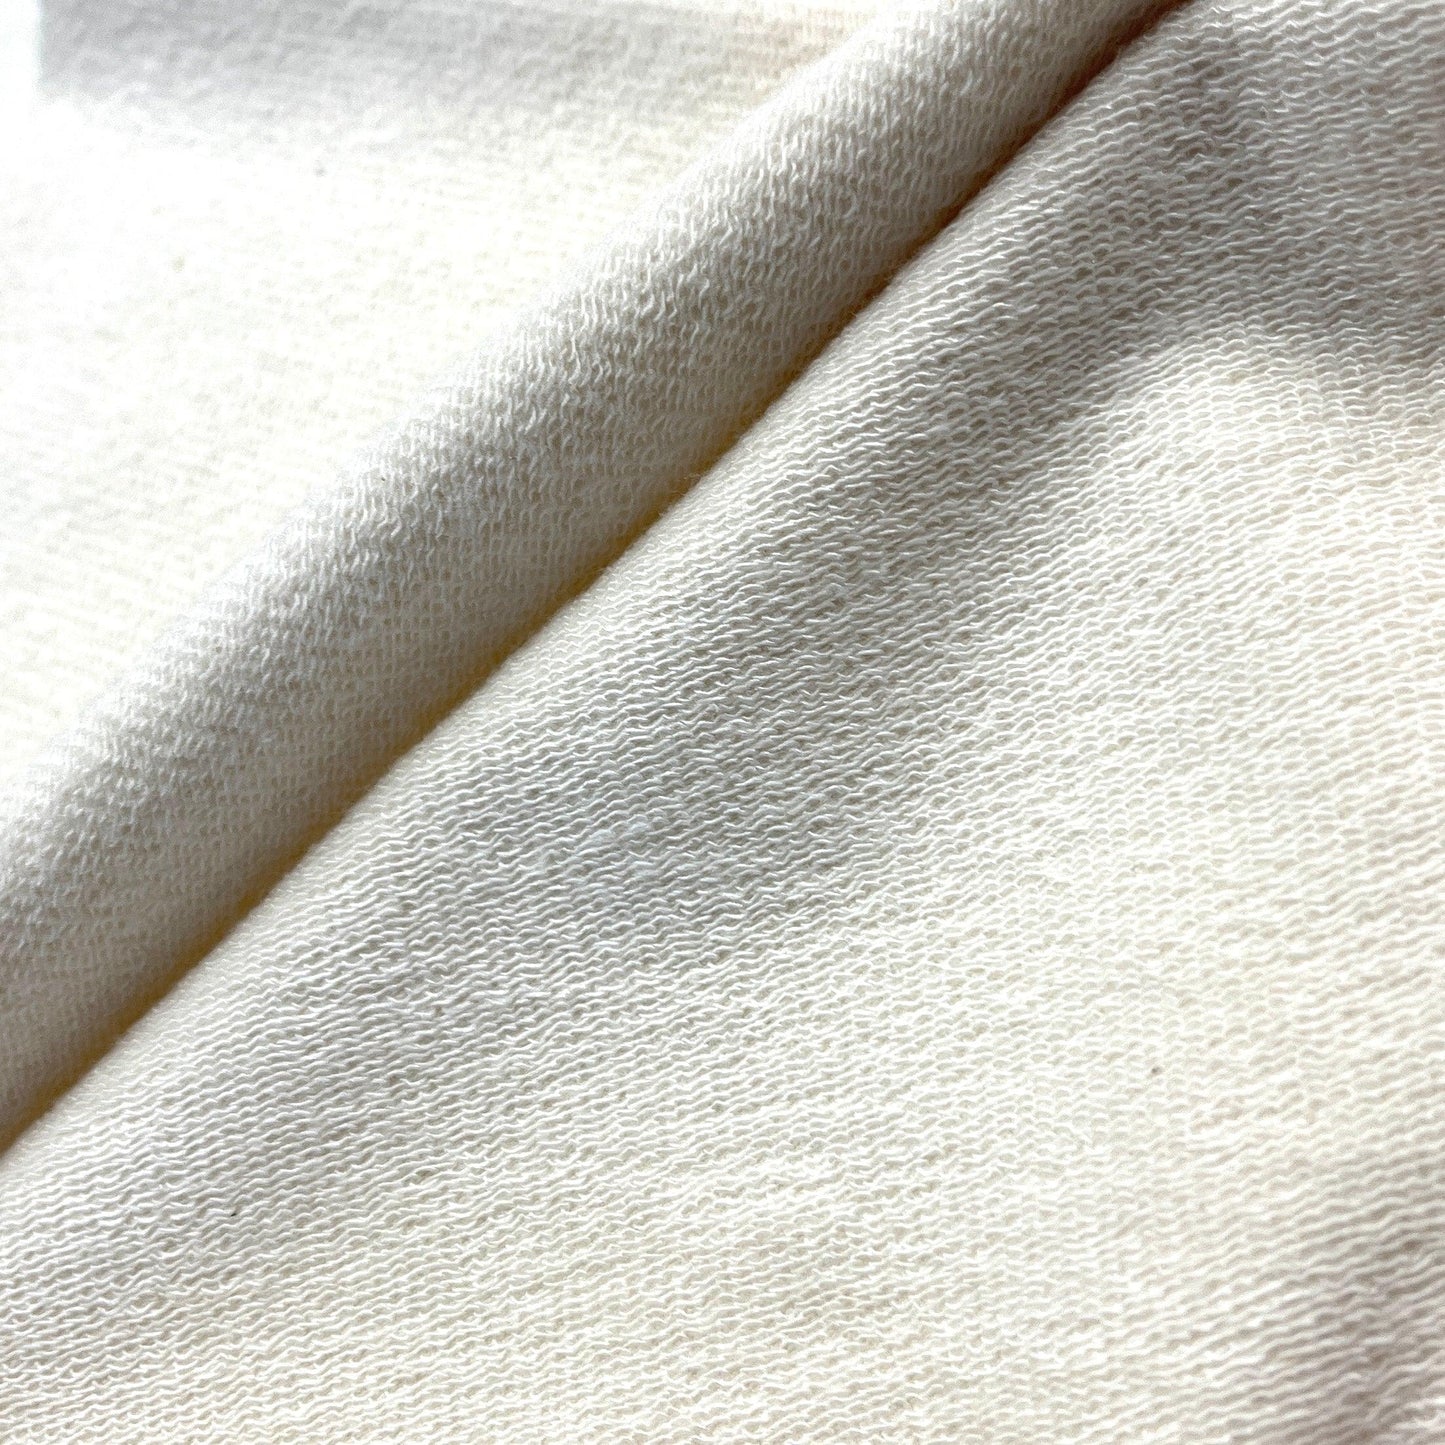 Natural Bamboo Stretch French Terry Fabric - 360 GSM - Knit in the USA, $18.49/yd, 15 Yards - Nature's Fabrics